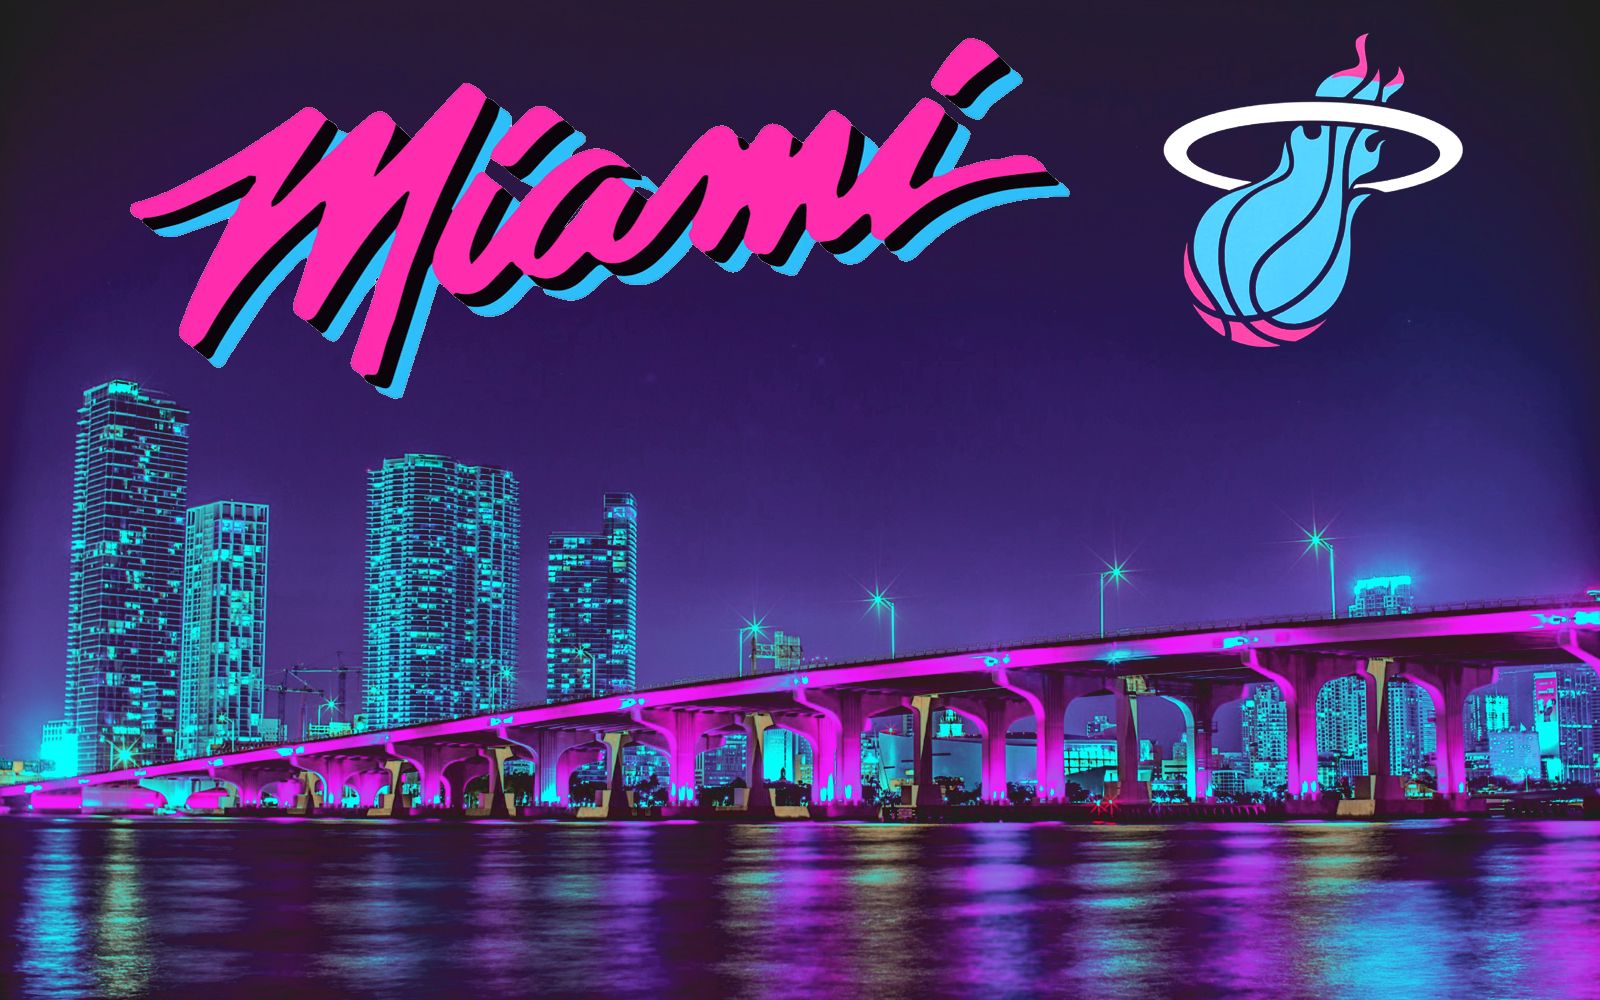 Free download Miami Vice Wallpaper Top Miami Vice Background [1600x1000] for your Desktop, Mobile & Tablet. Explore Vice Background. Miami Vice Wallpaper, Vice Movie Wallpaper, Grand Theft Auto: Vice City Wallpaper